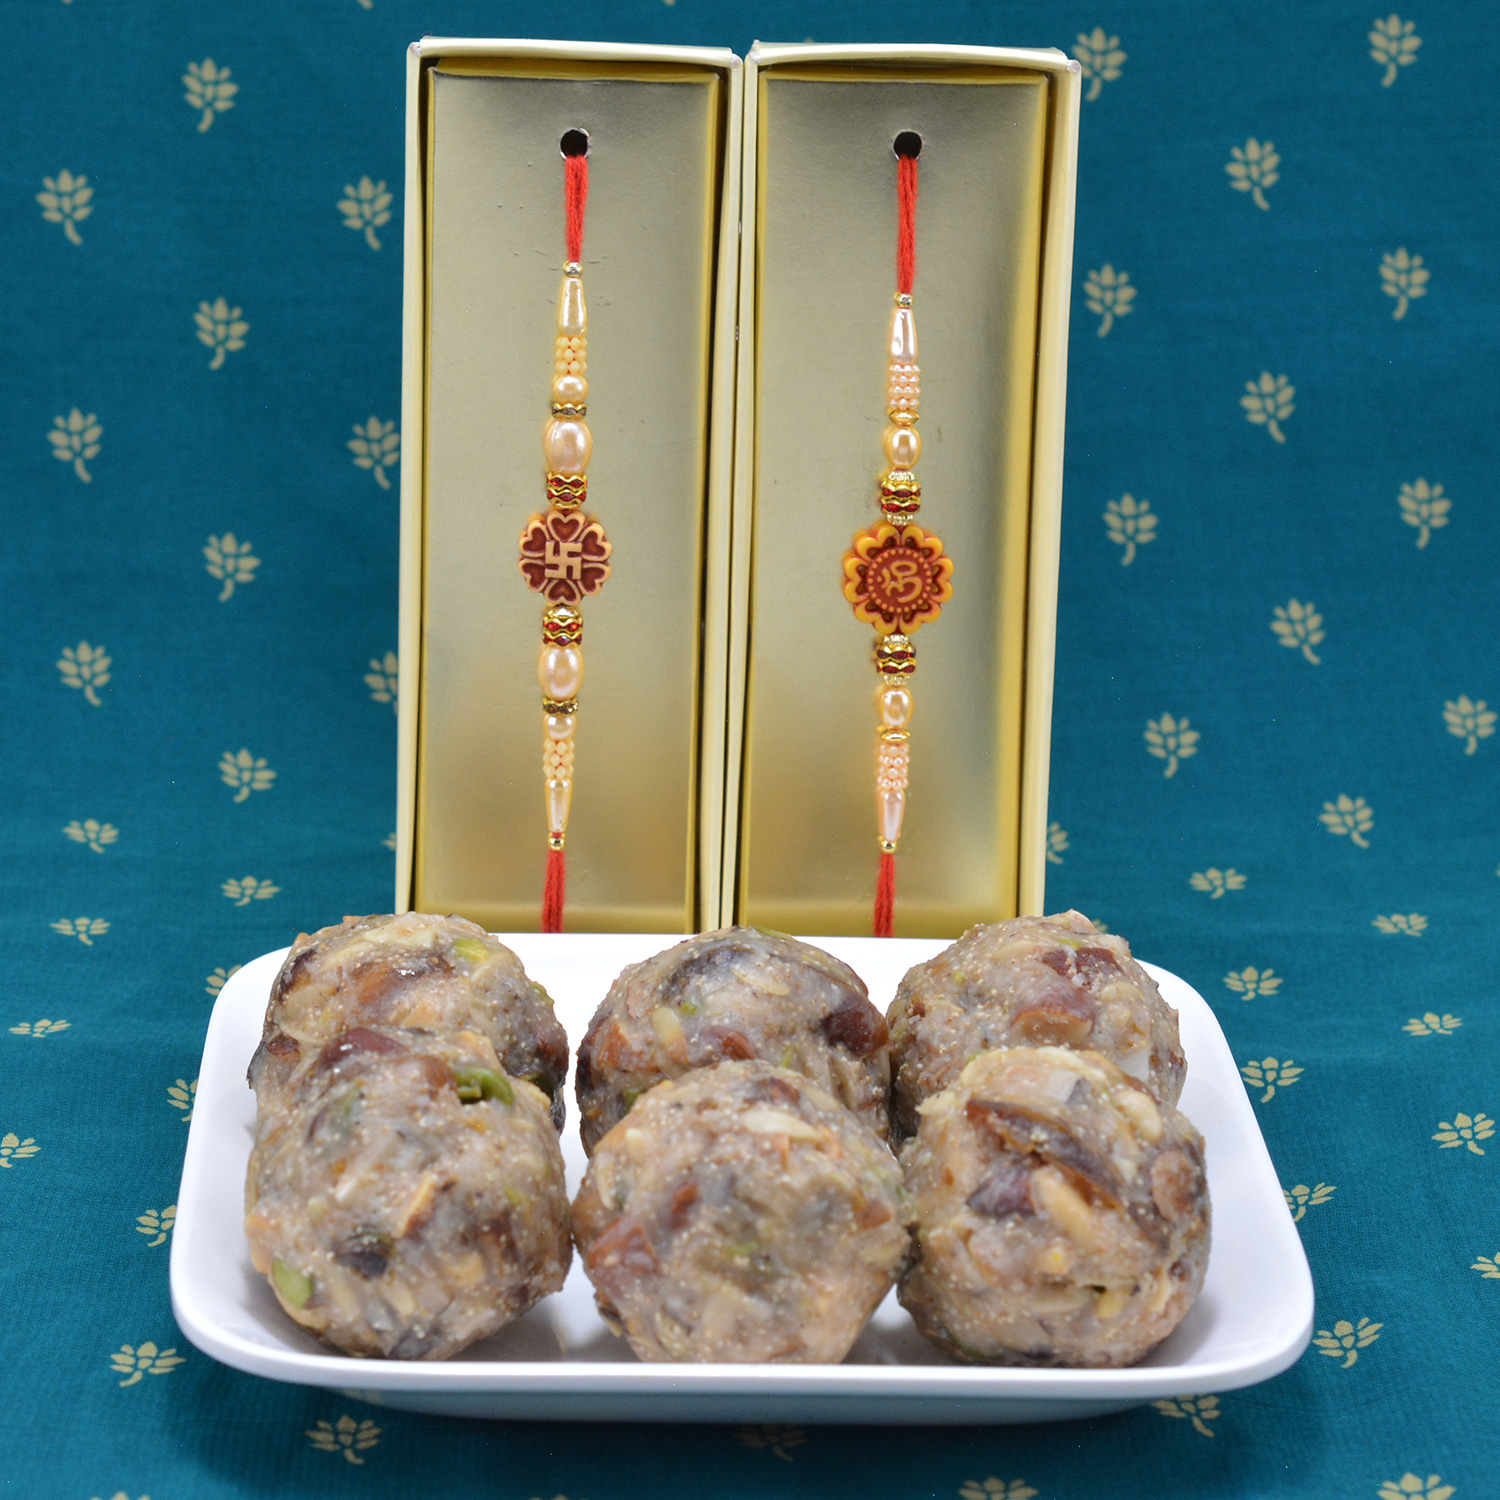 Divine Om and Swastika Rakhi Set for 2 Brothers with Delicious Sweet of Kaju Dry Fruit Laddu